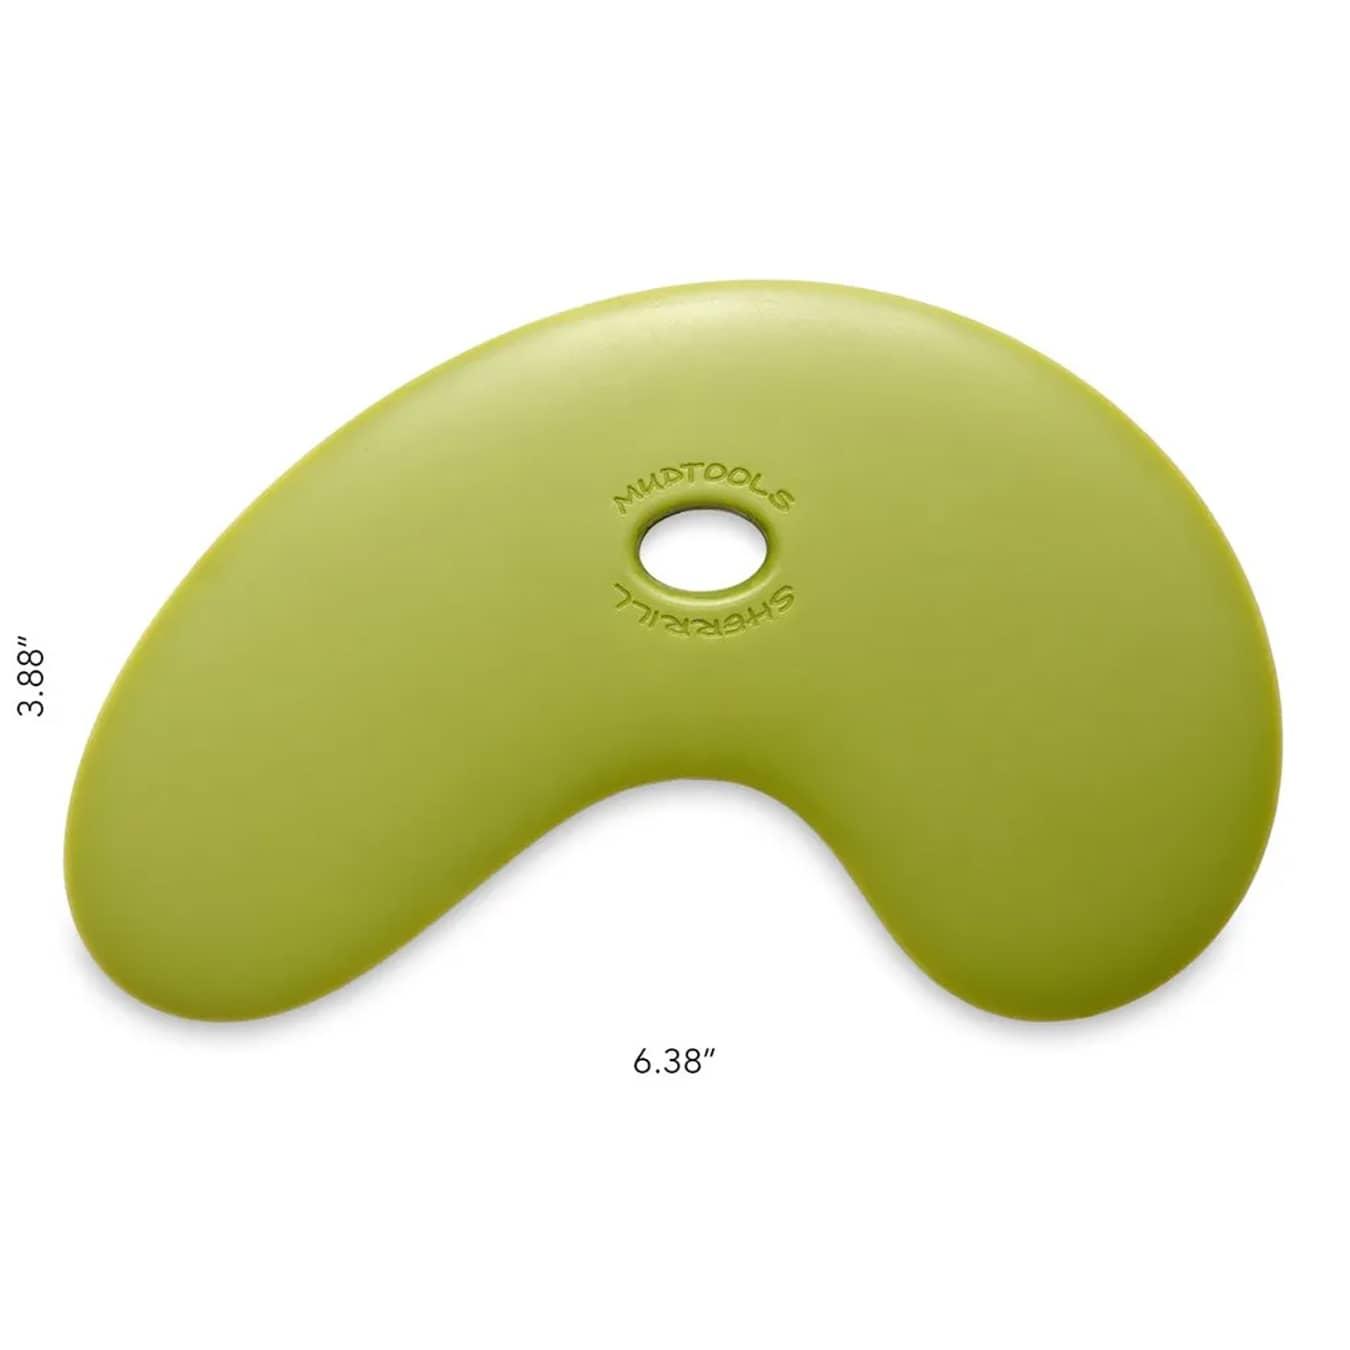 Mudtools Large Bowl Kidney – Green (Firm)